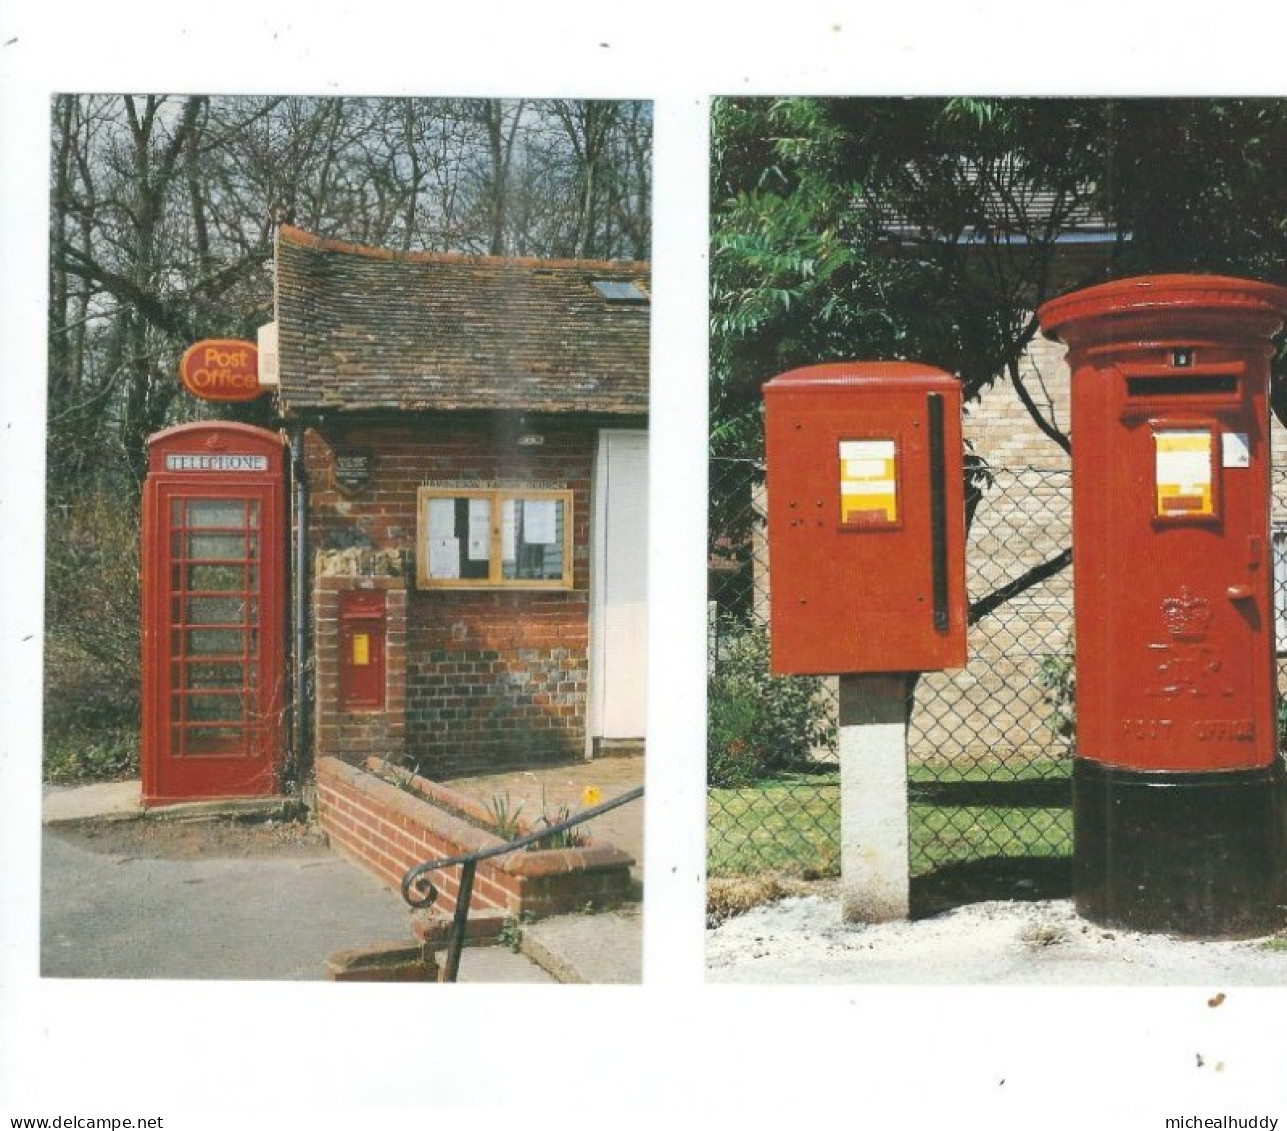 4  POSTCARDS   POST BOXES  PUBL BY PH TOPICS - Postal Services